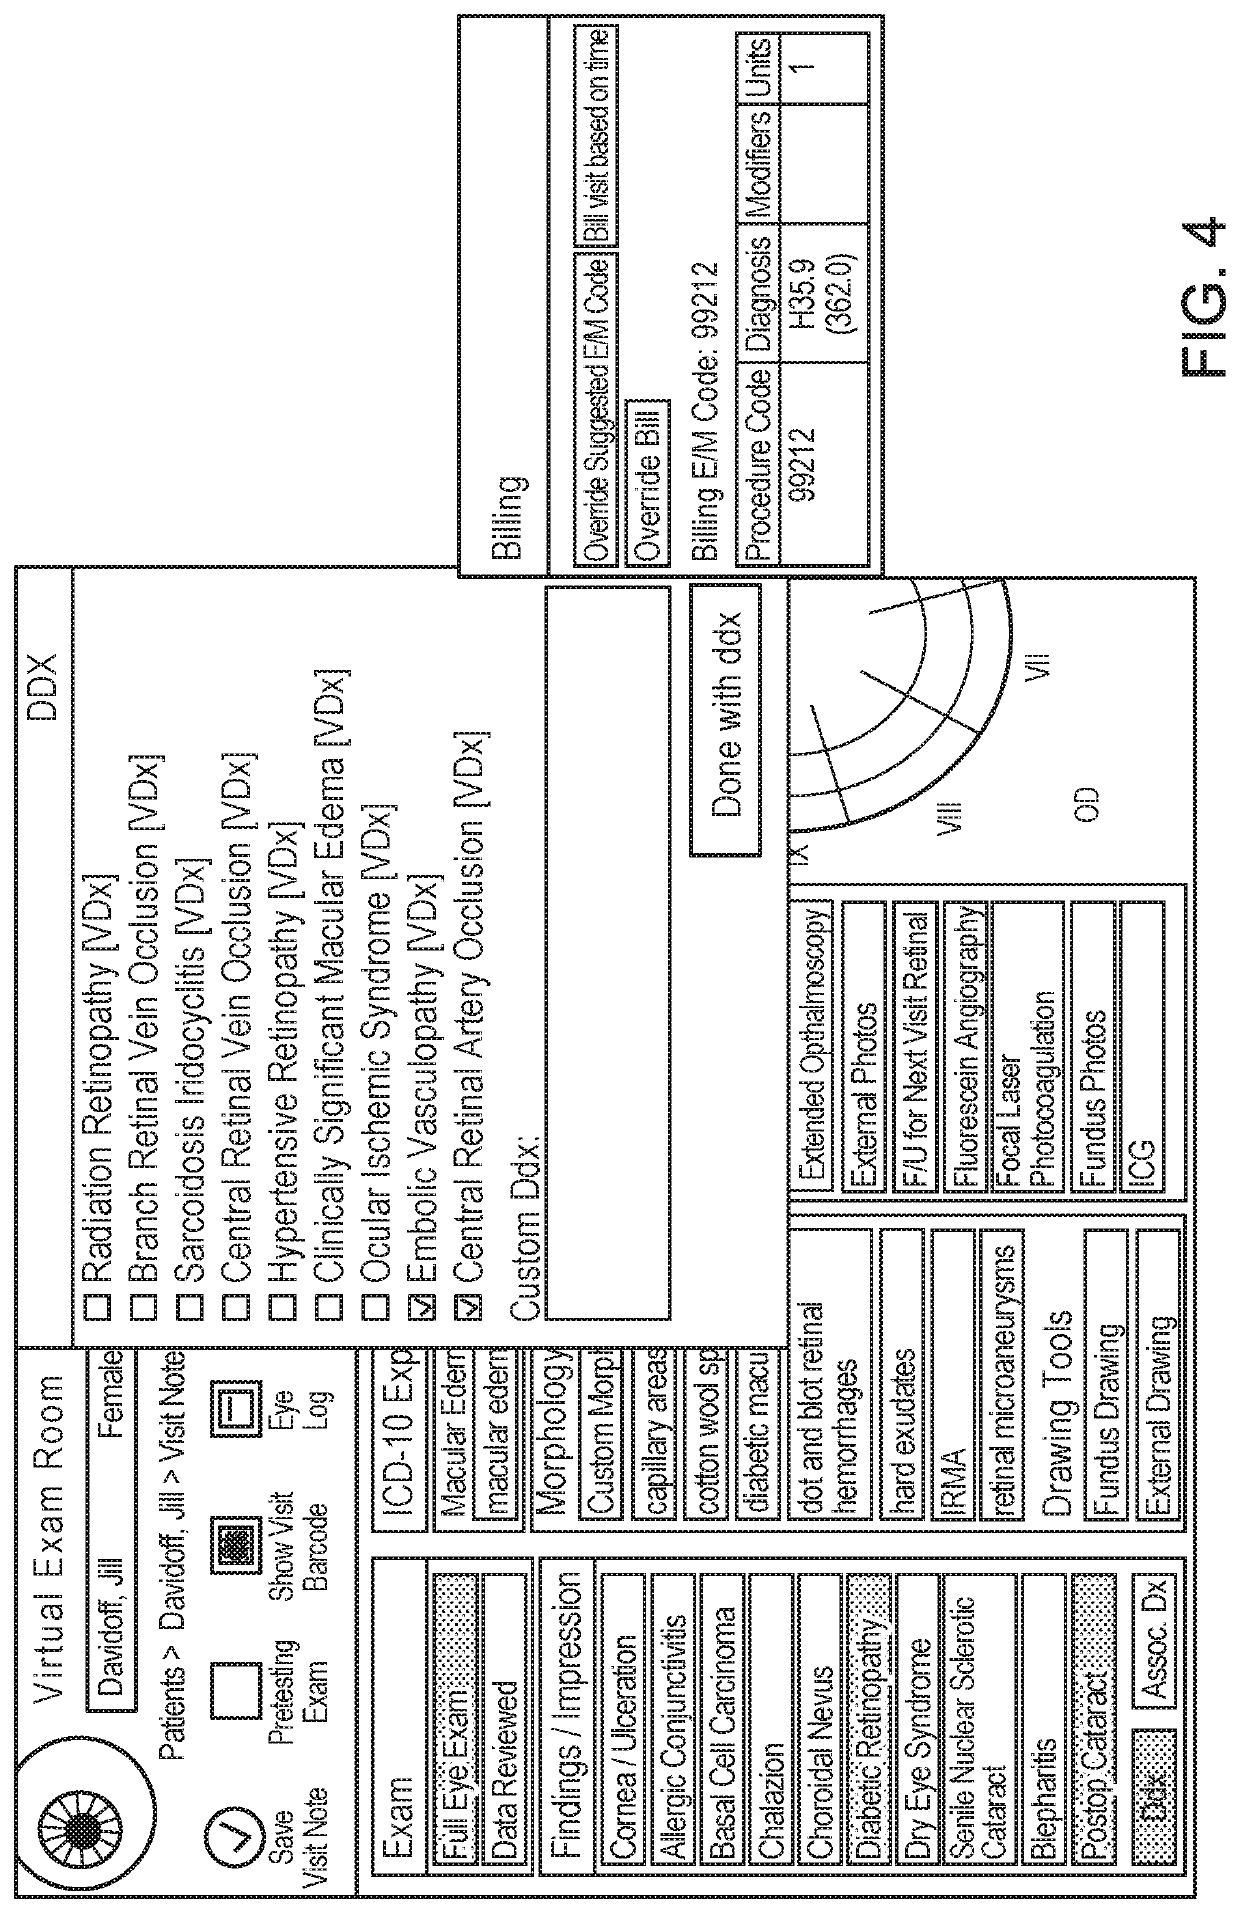 Method and system to automate the designation of the international classification of disease codes for a patient